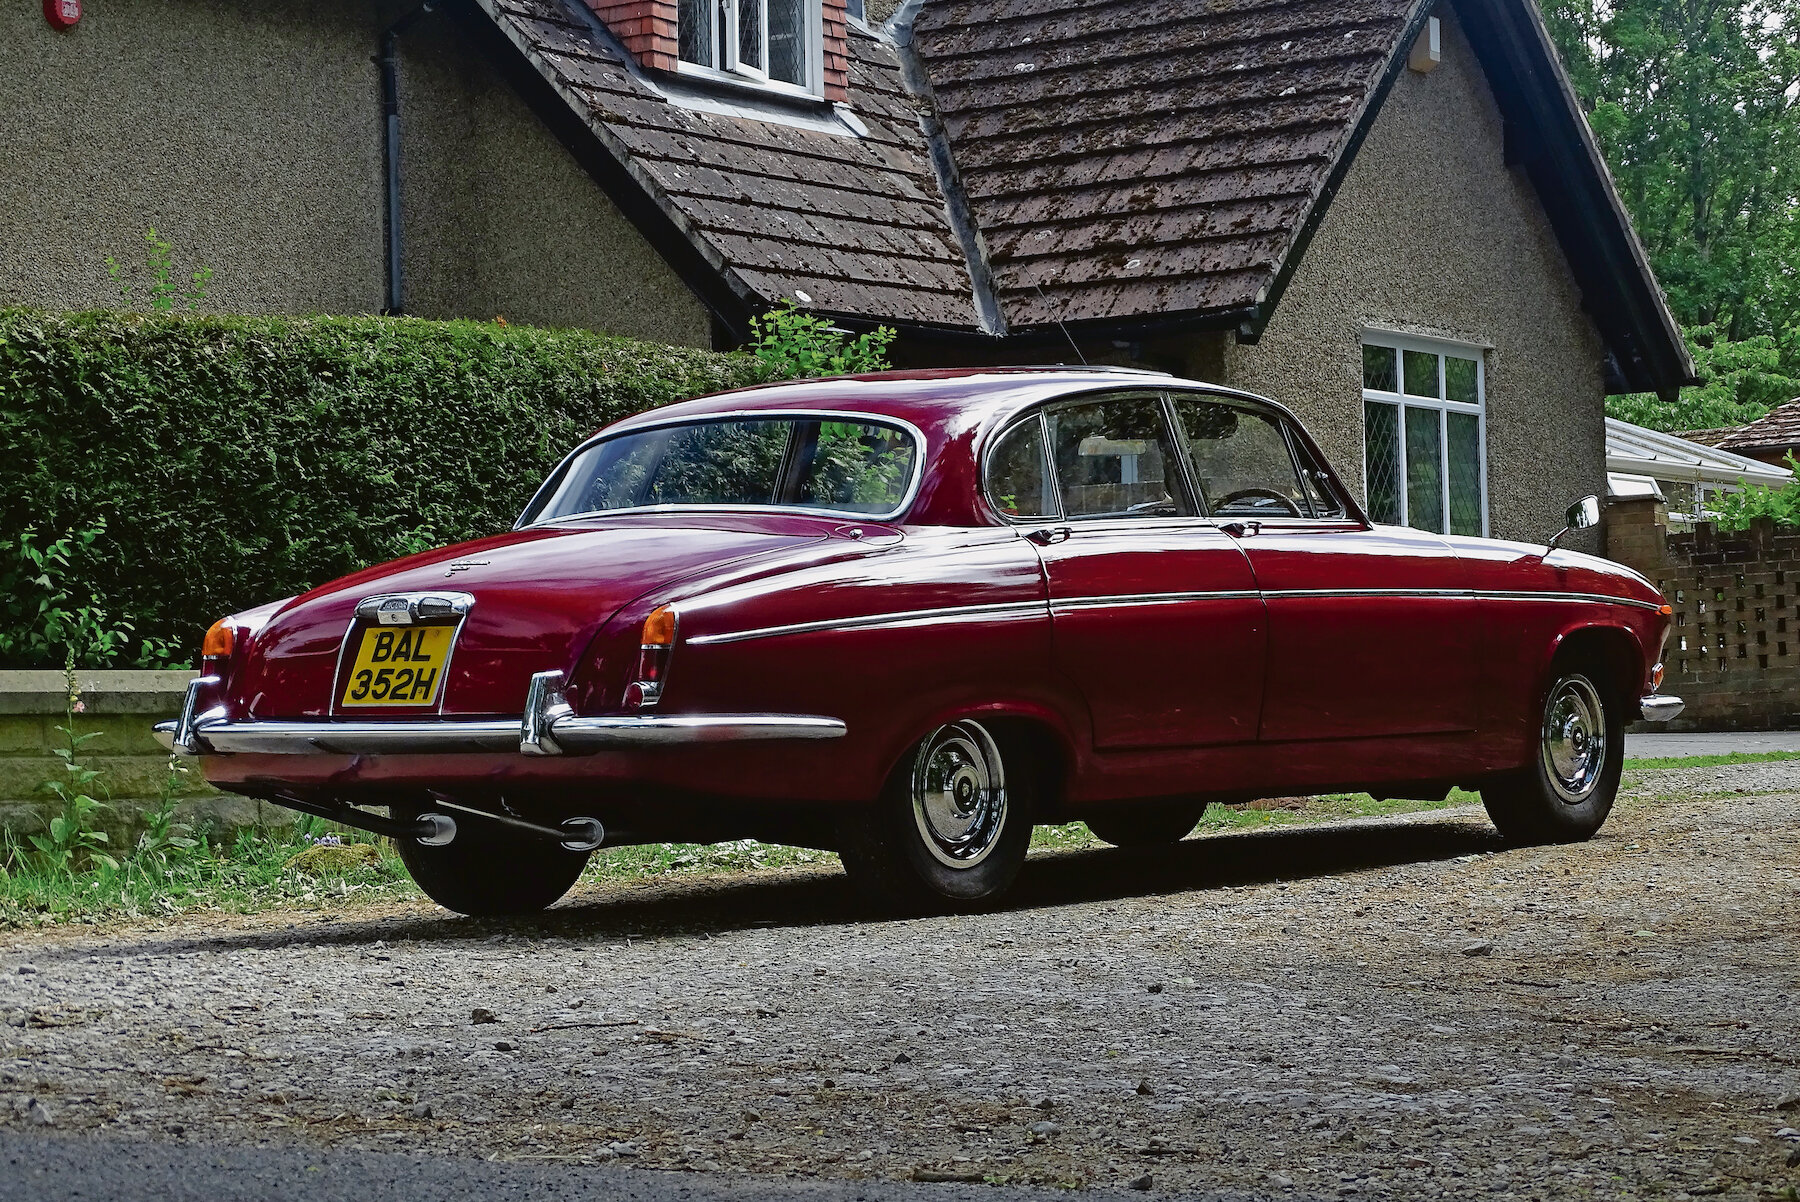 Forever undervalued – the big Jaguar 420G represents grace, pace and space turned up to 11…